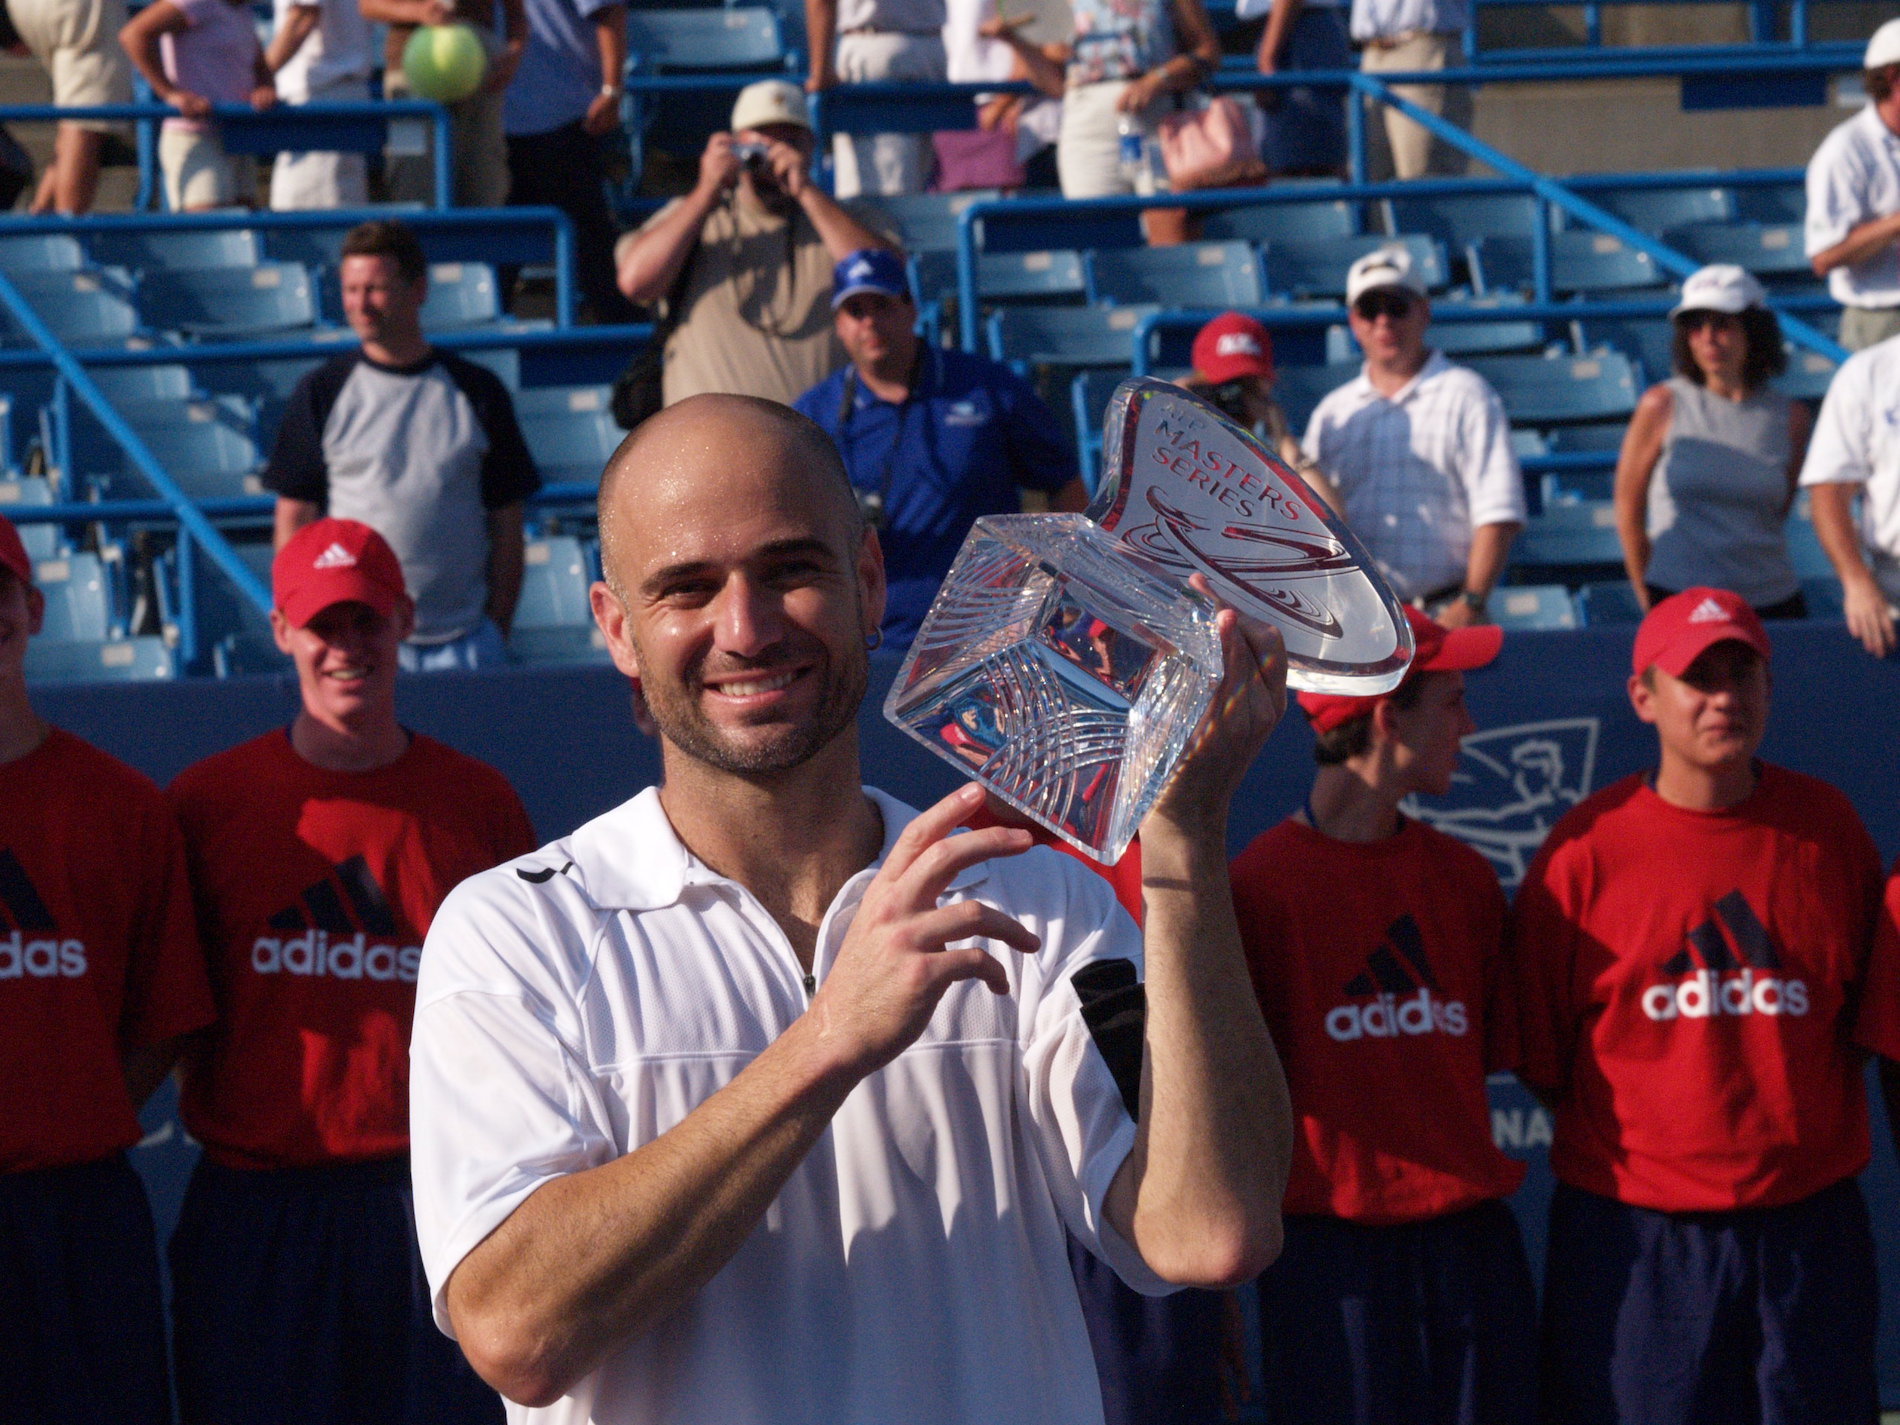 Andre Agassi with trophy